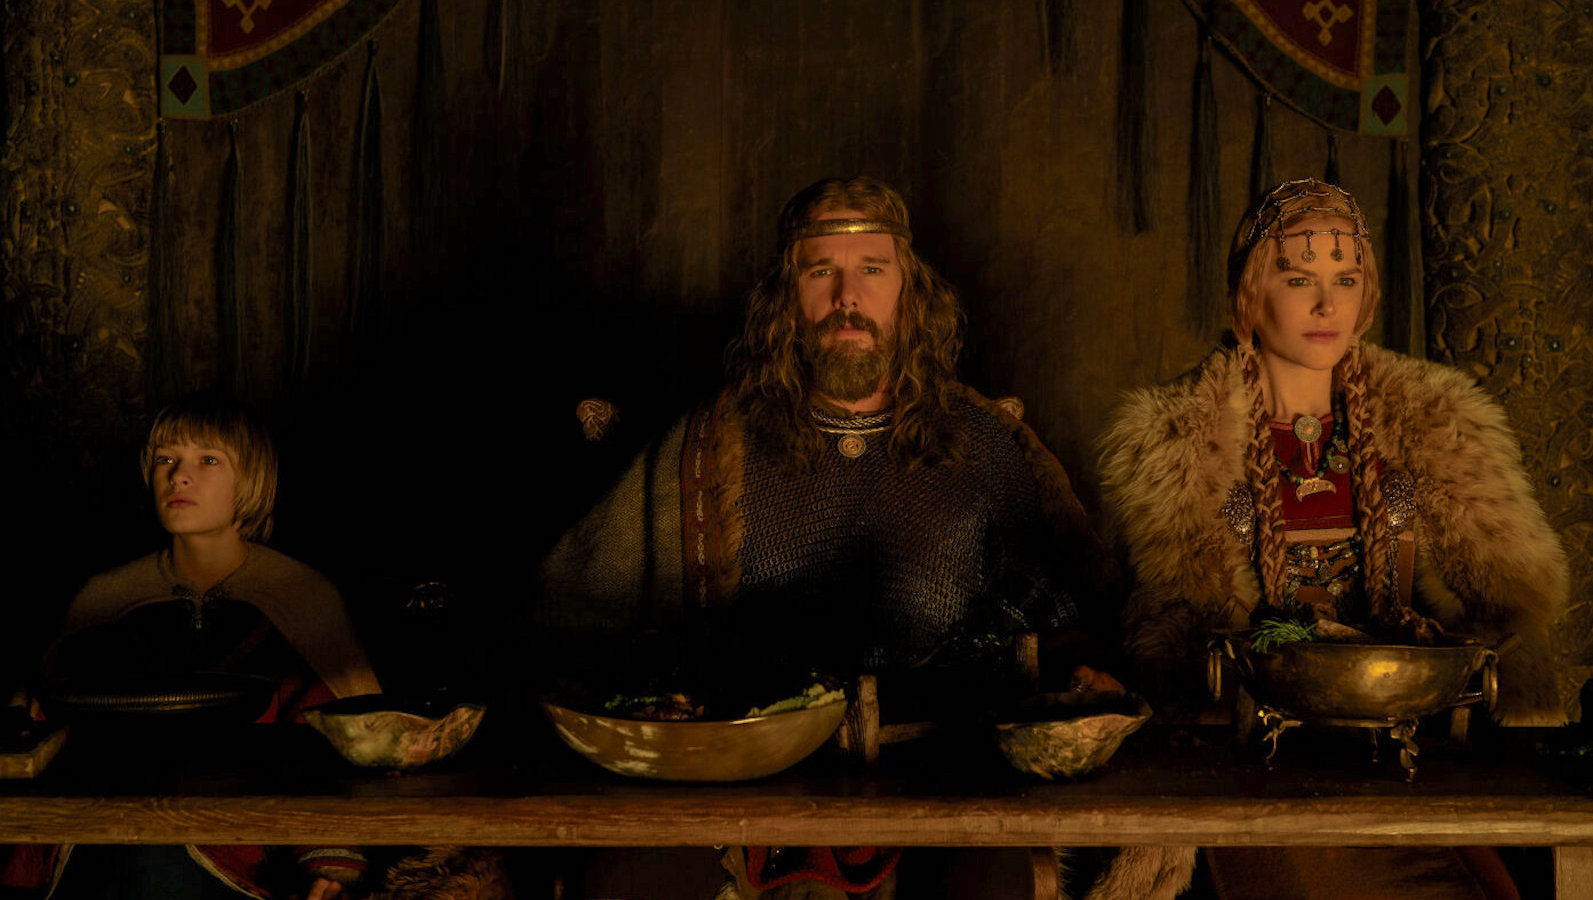 Three members of a Viking family sit in a dark room at a dinner table facing camera